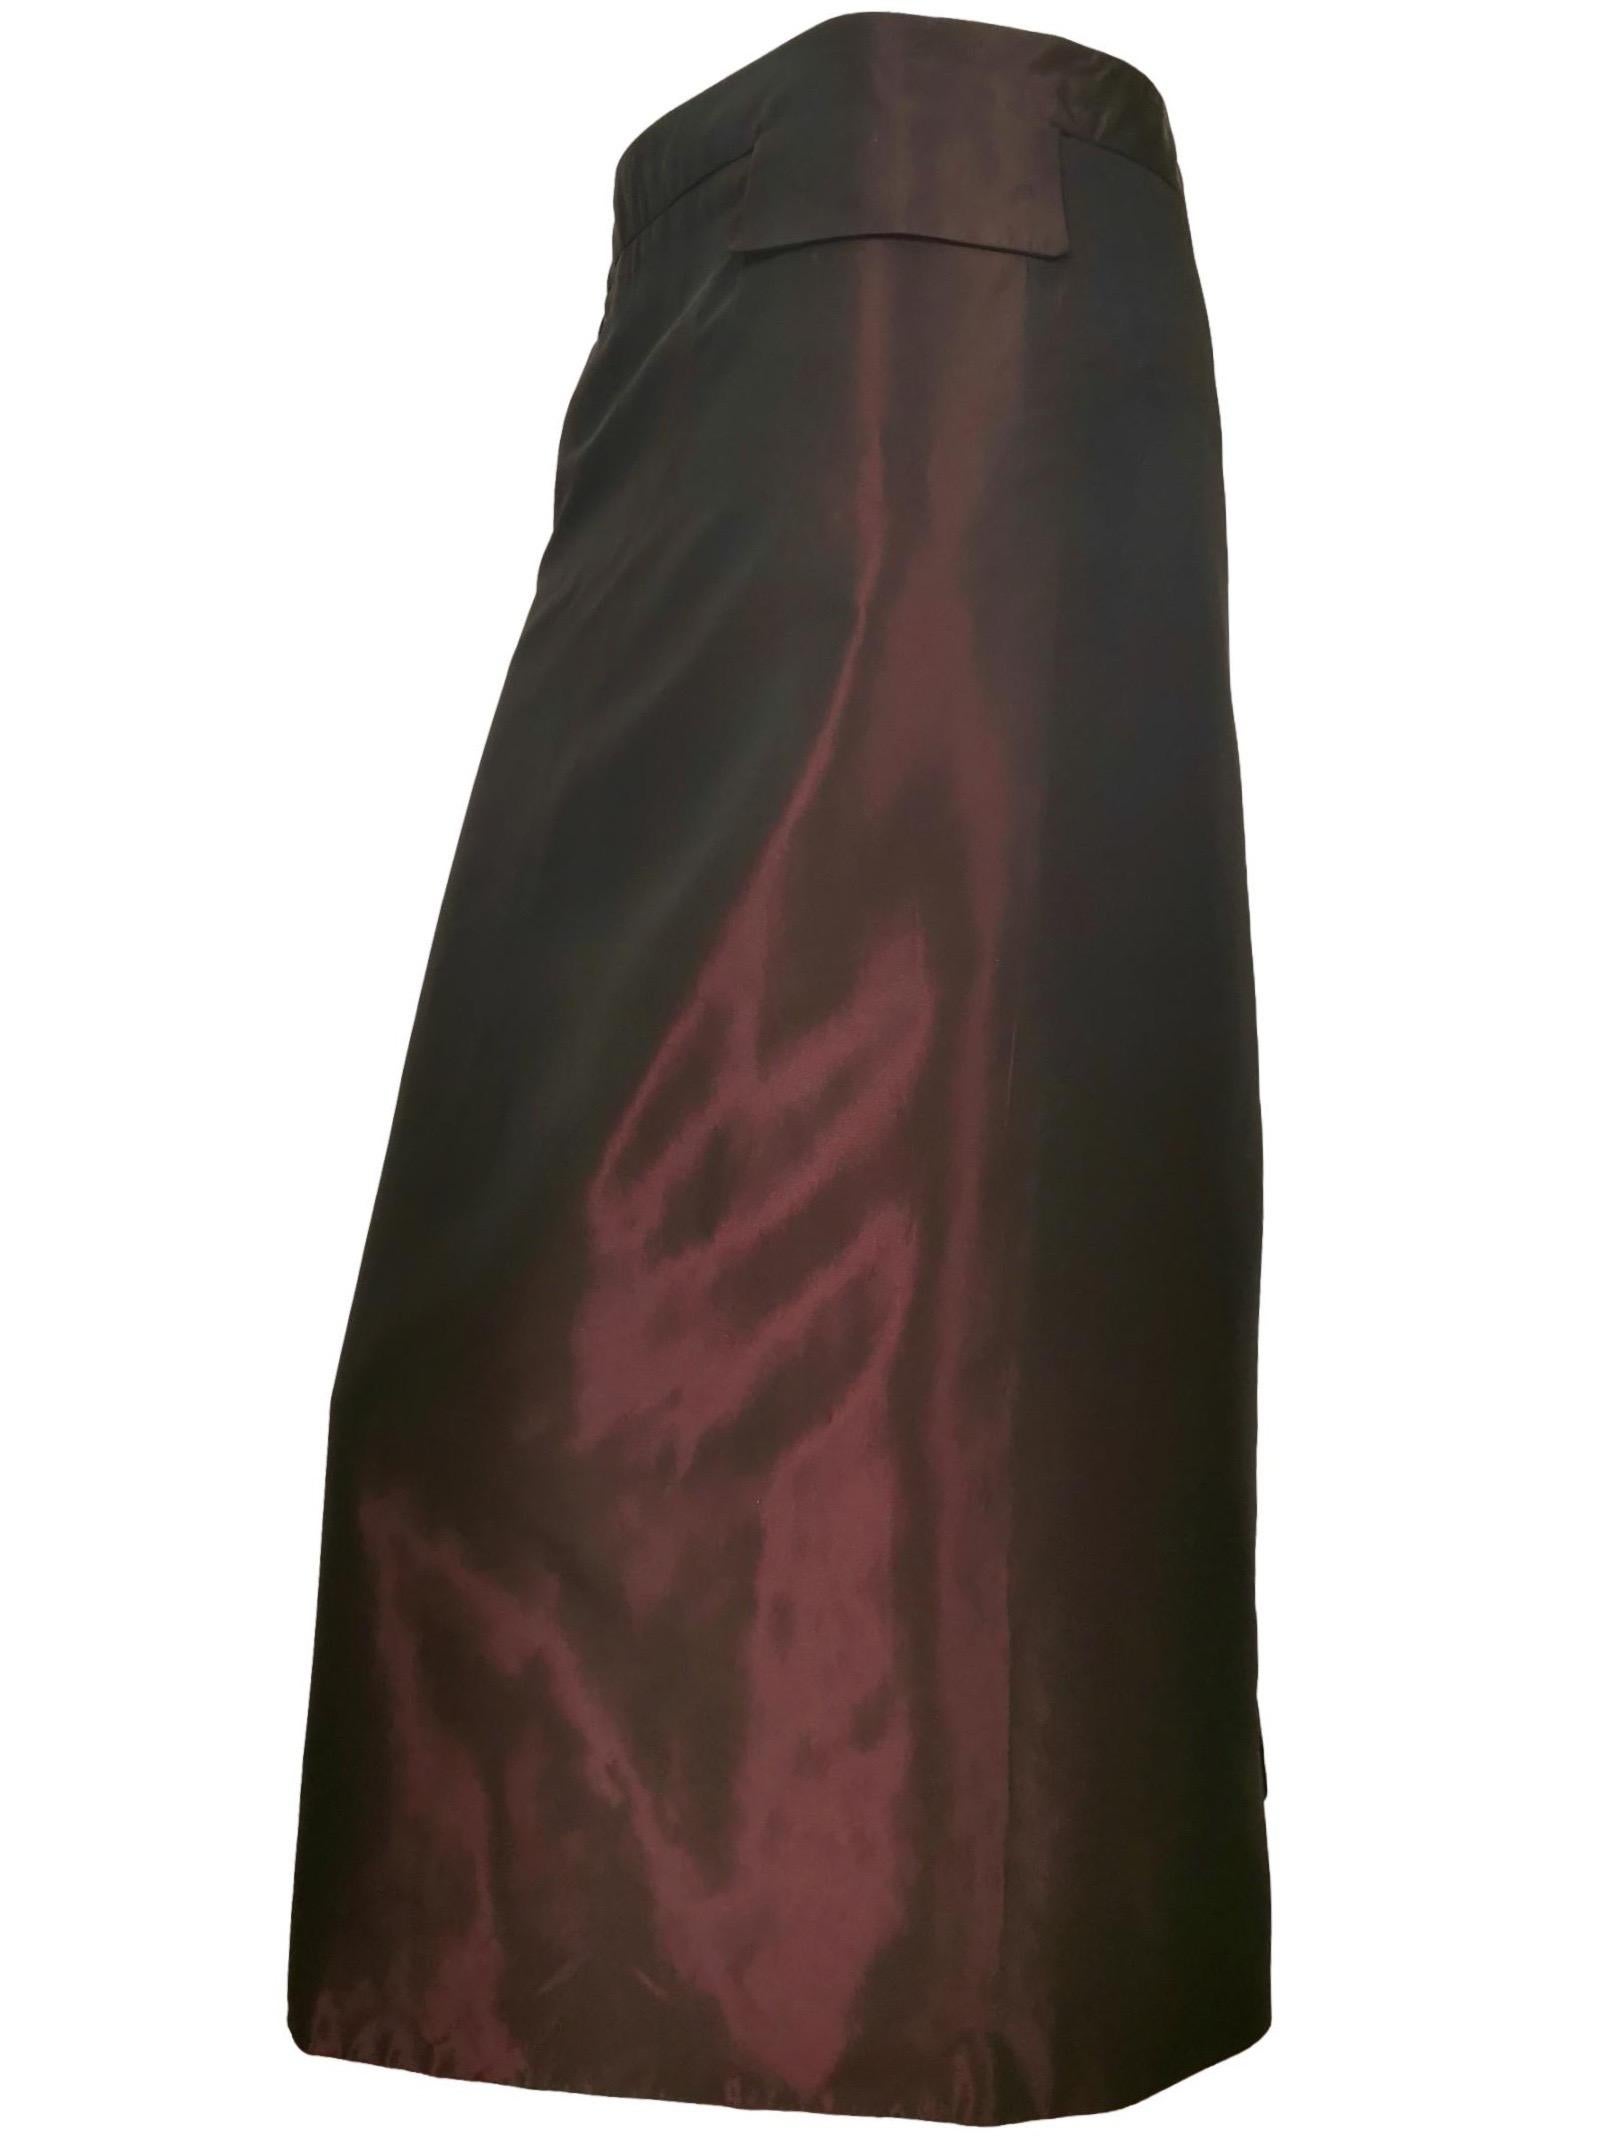 Alexander McQueen Two Tone Kick Pleat Fitted Skirt 1996 For Sale 4